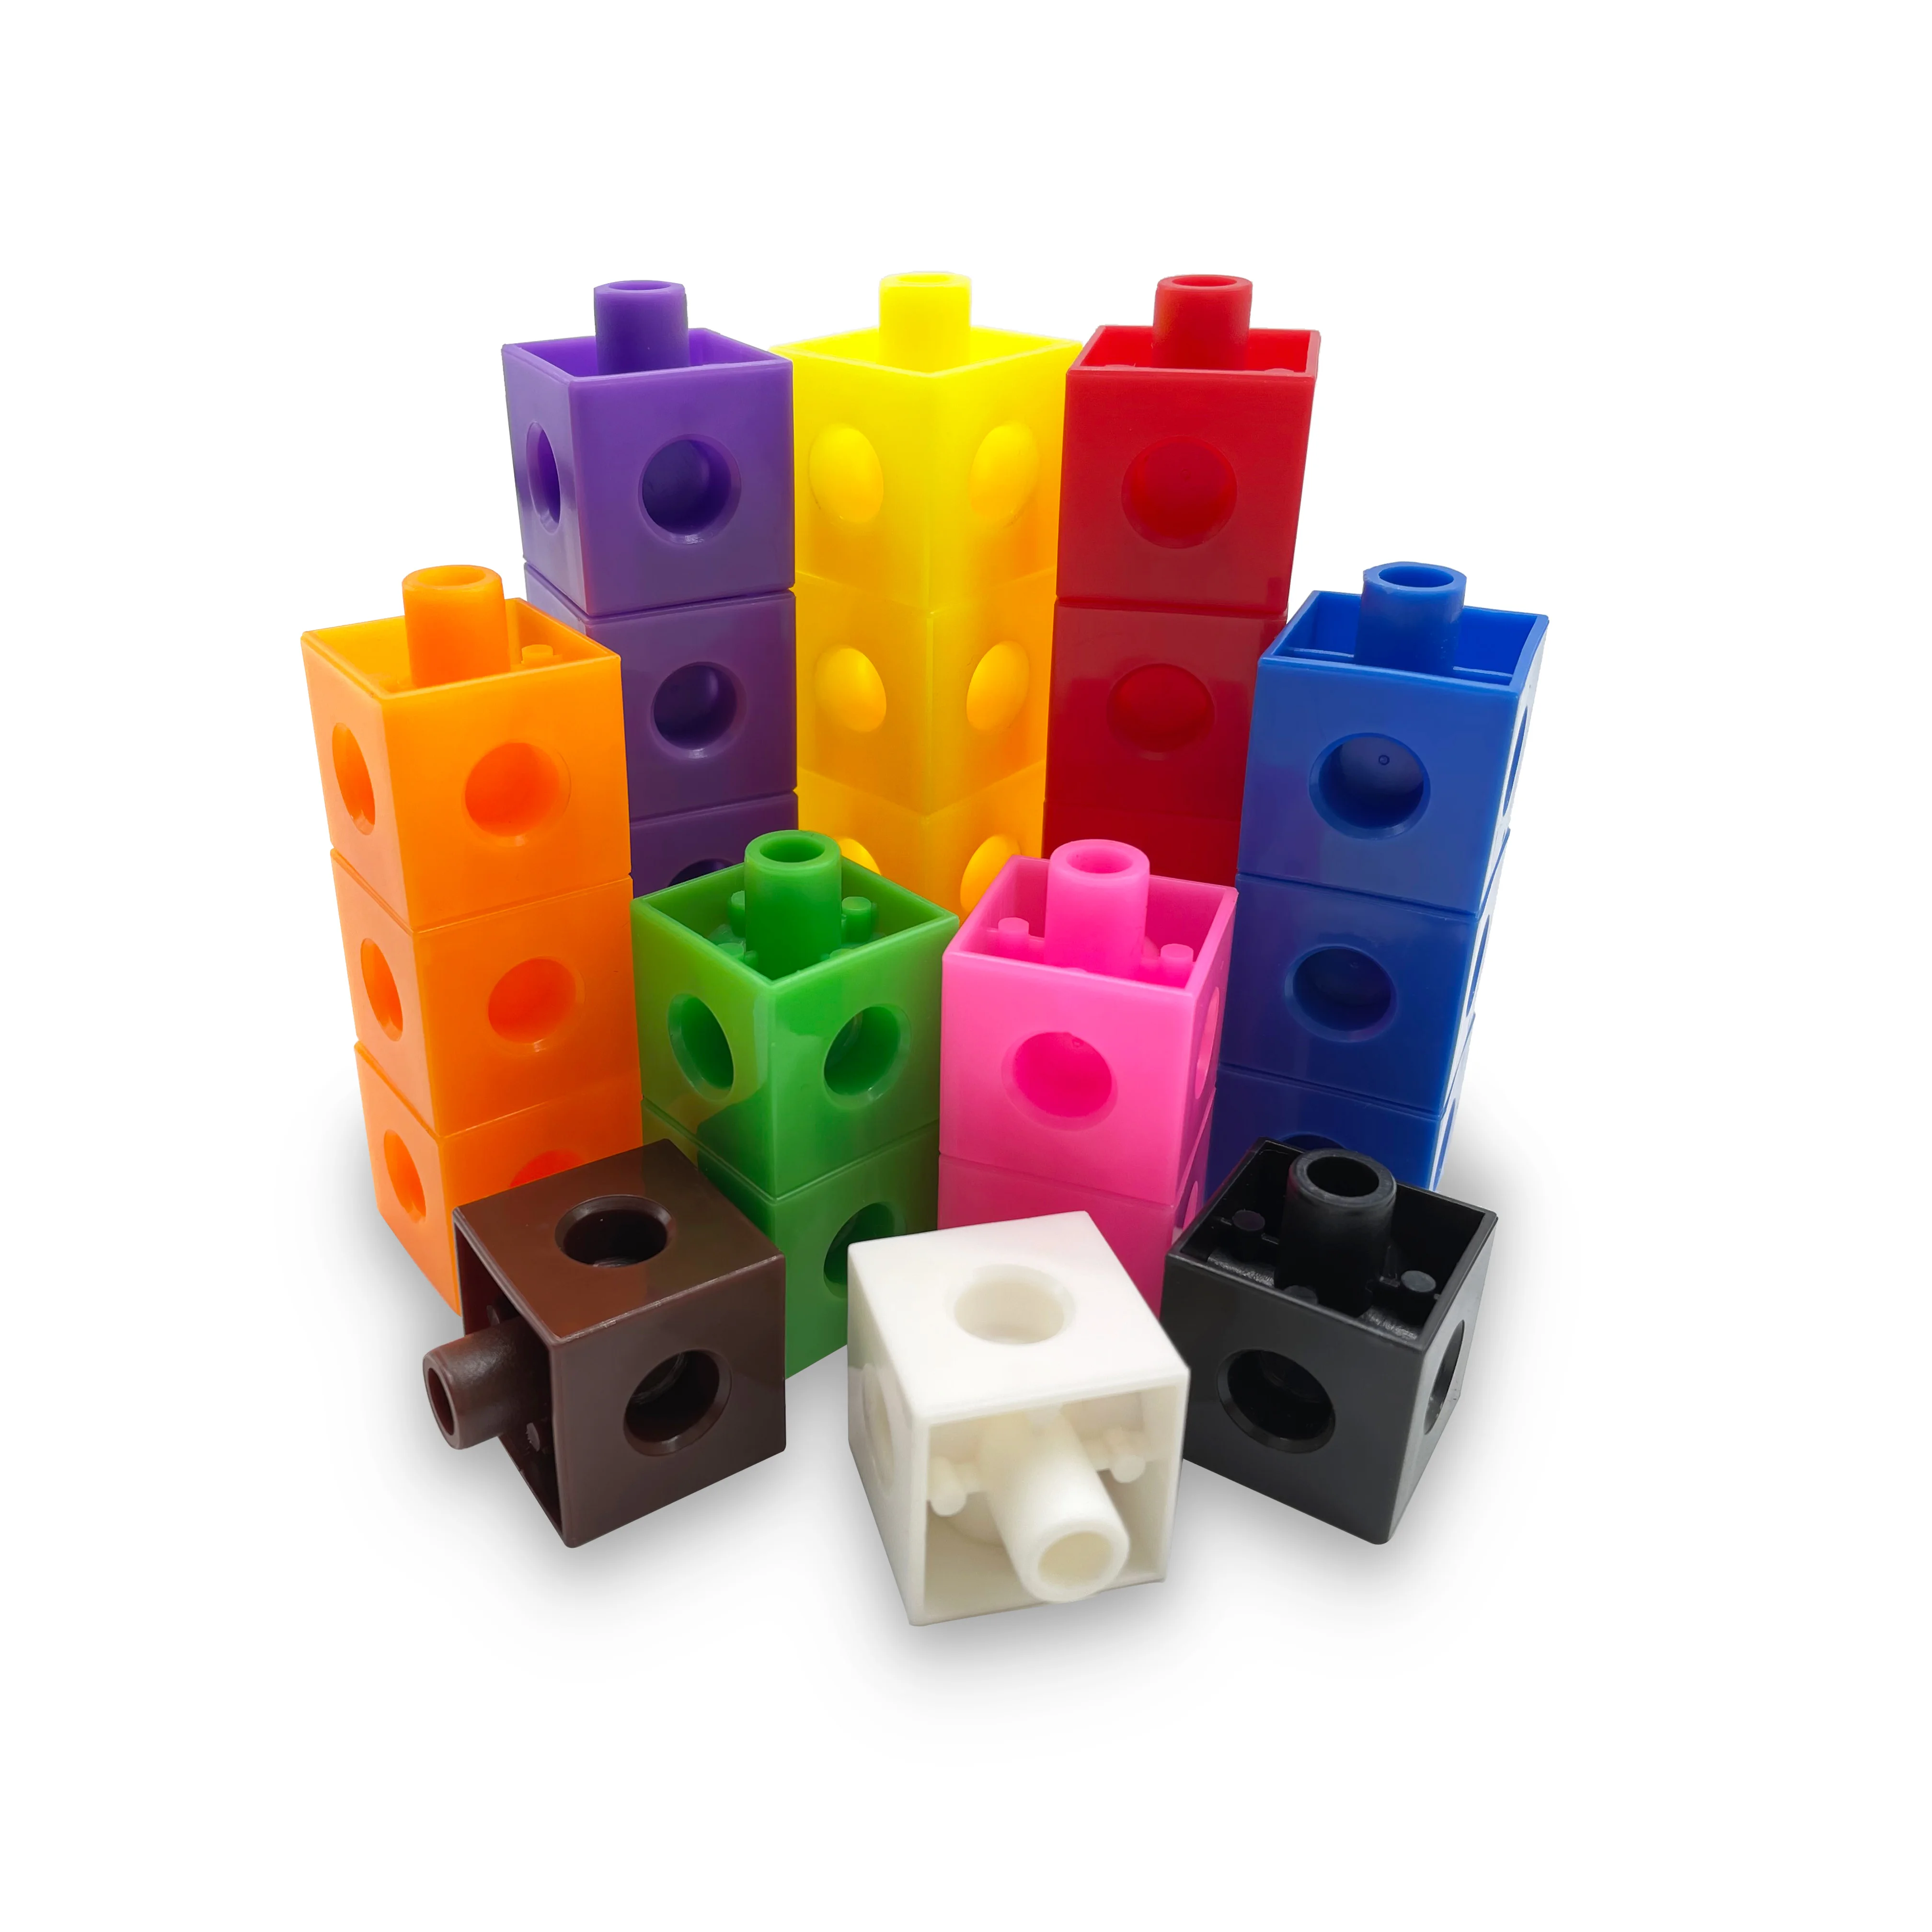 cheap snap cubes educational counting toy| Alibaba.com